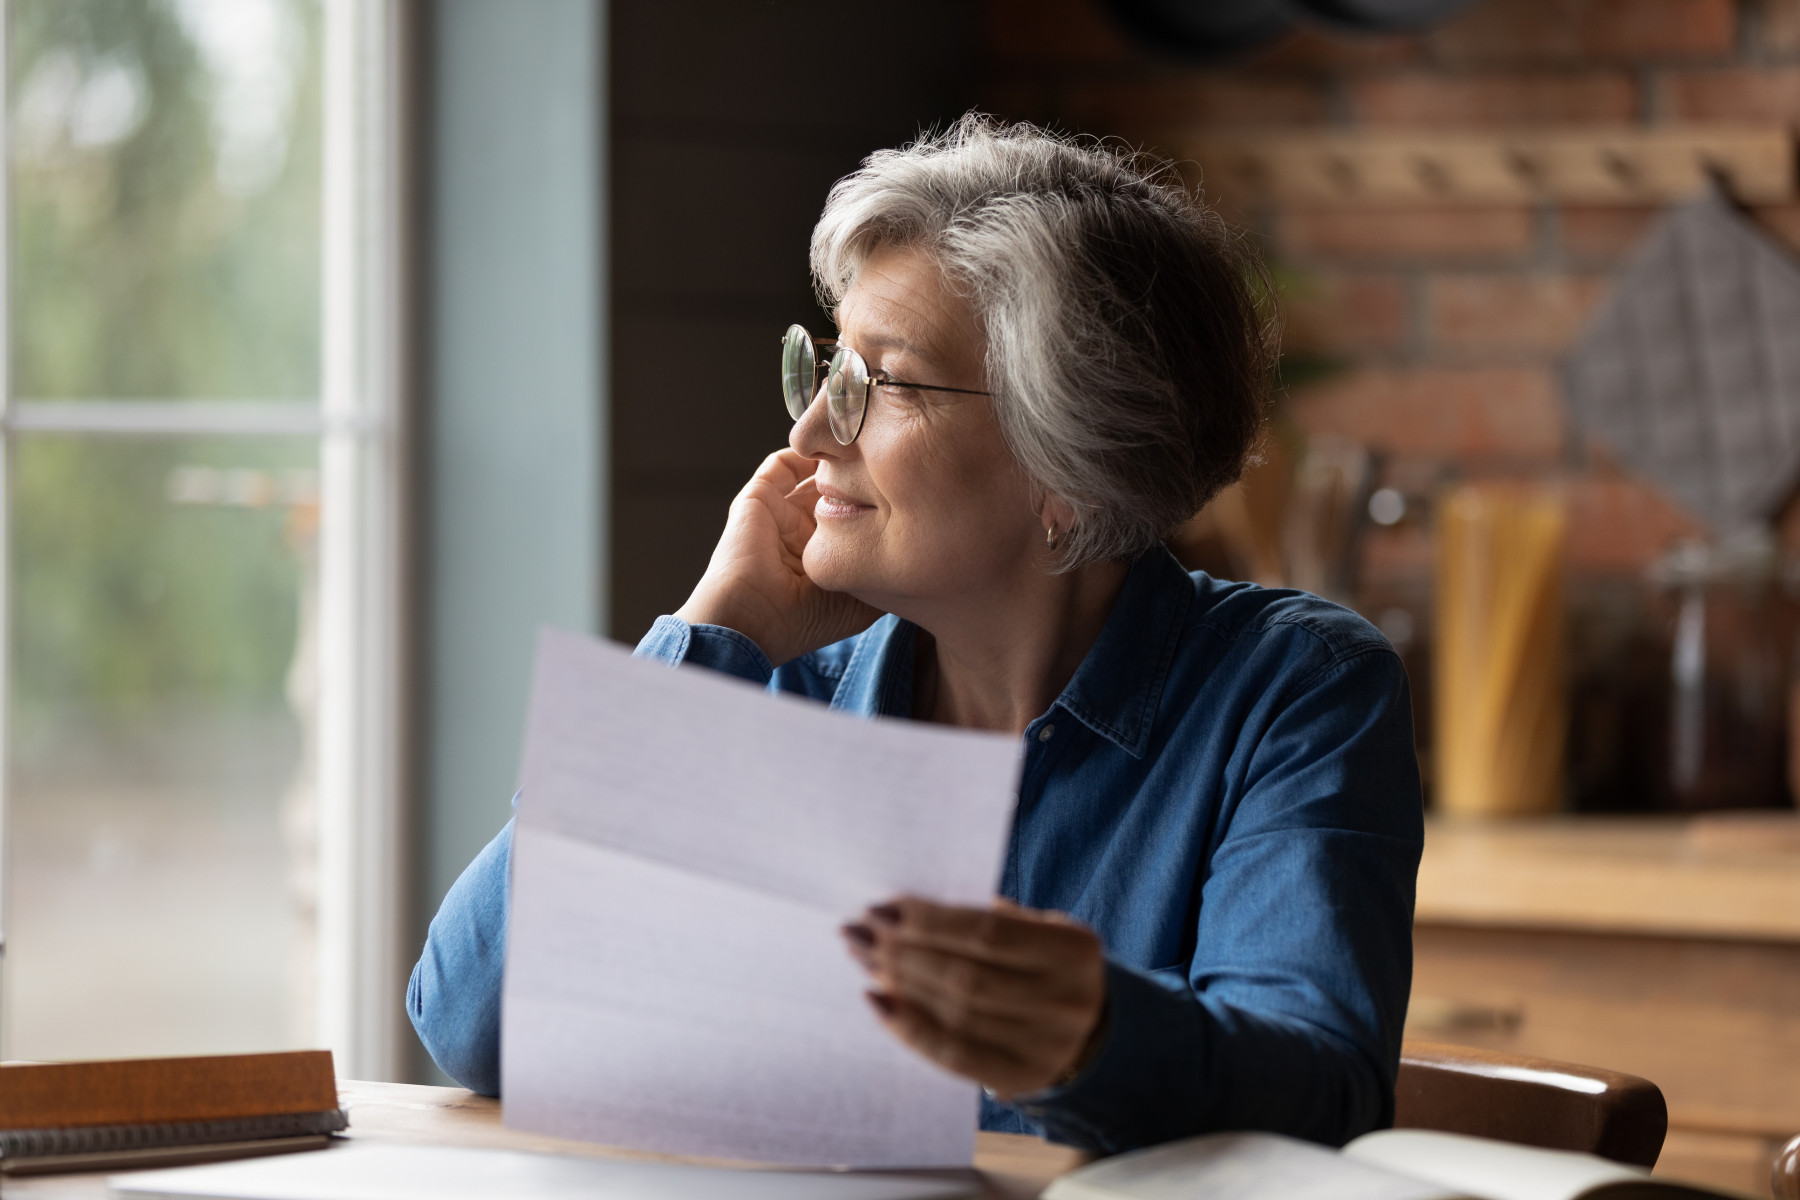 A thoughtful senior woman holding documents, considering a self managed aged care package for home care